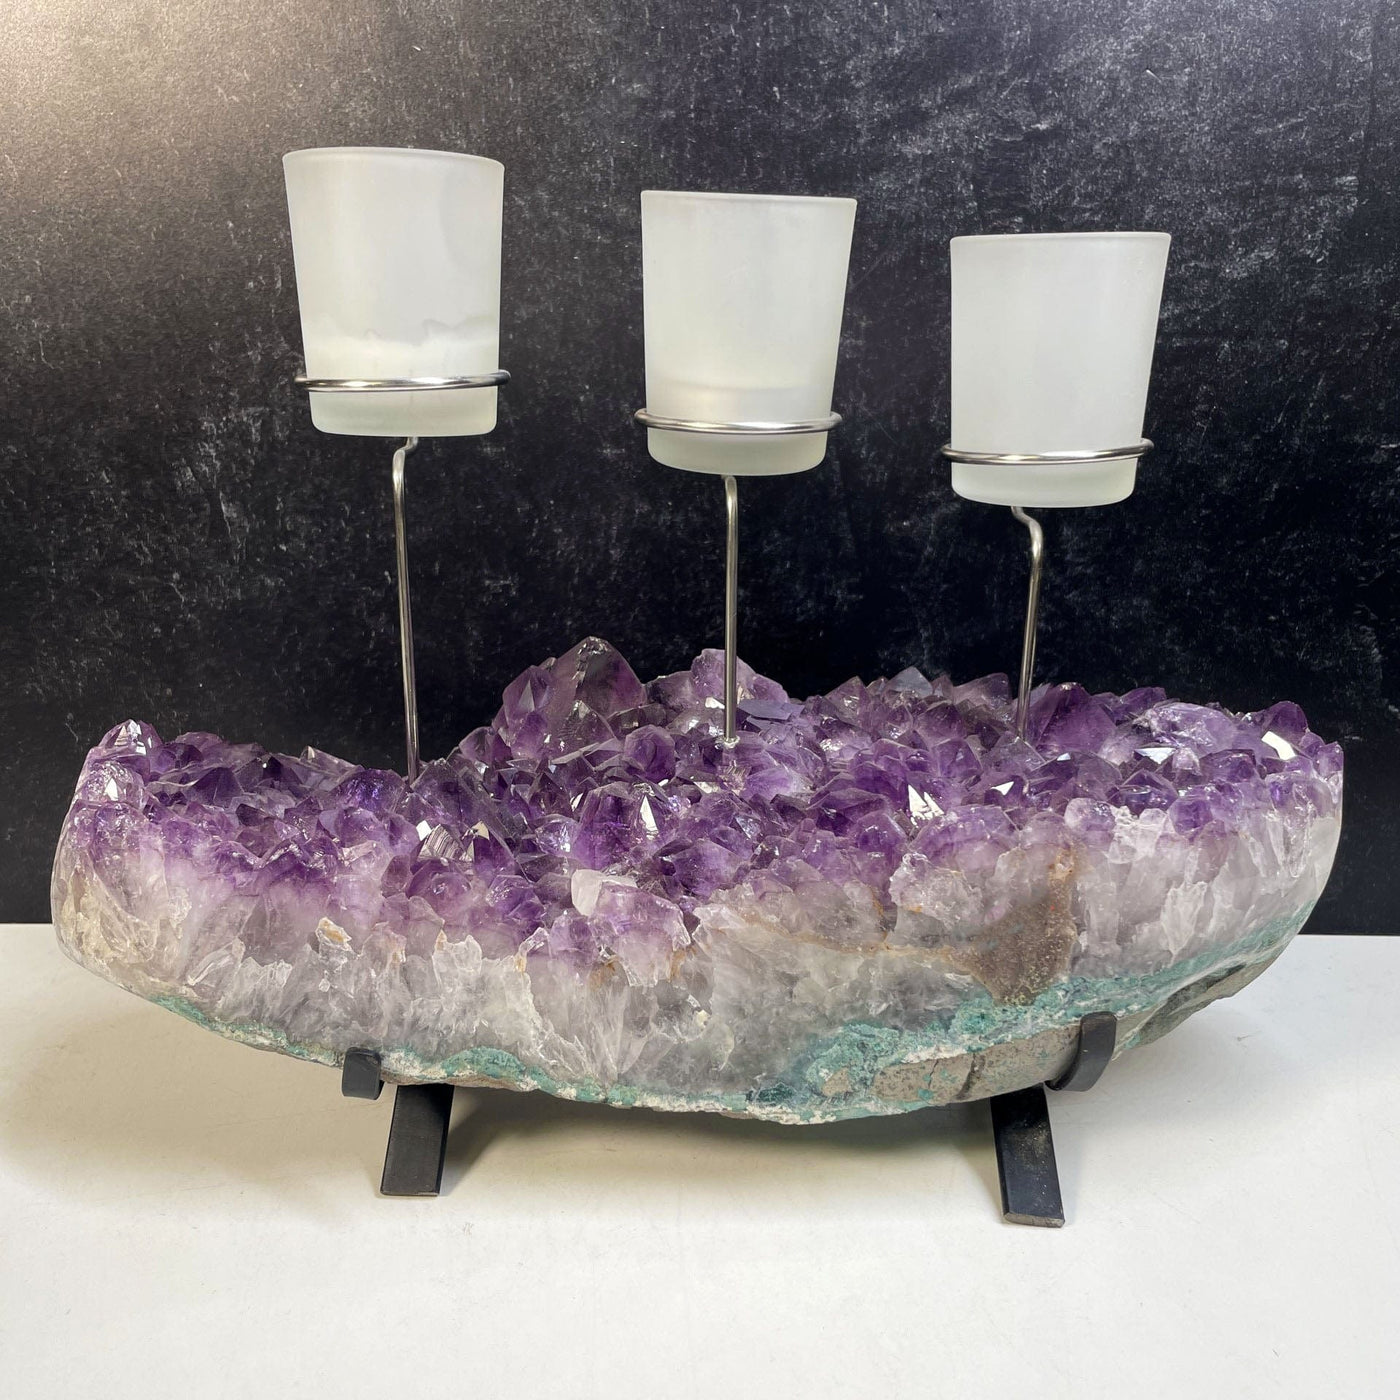 Amethyst Cluster Base with 3 Votive Candle Holders